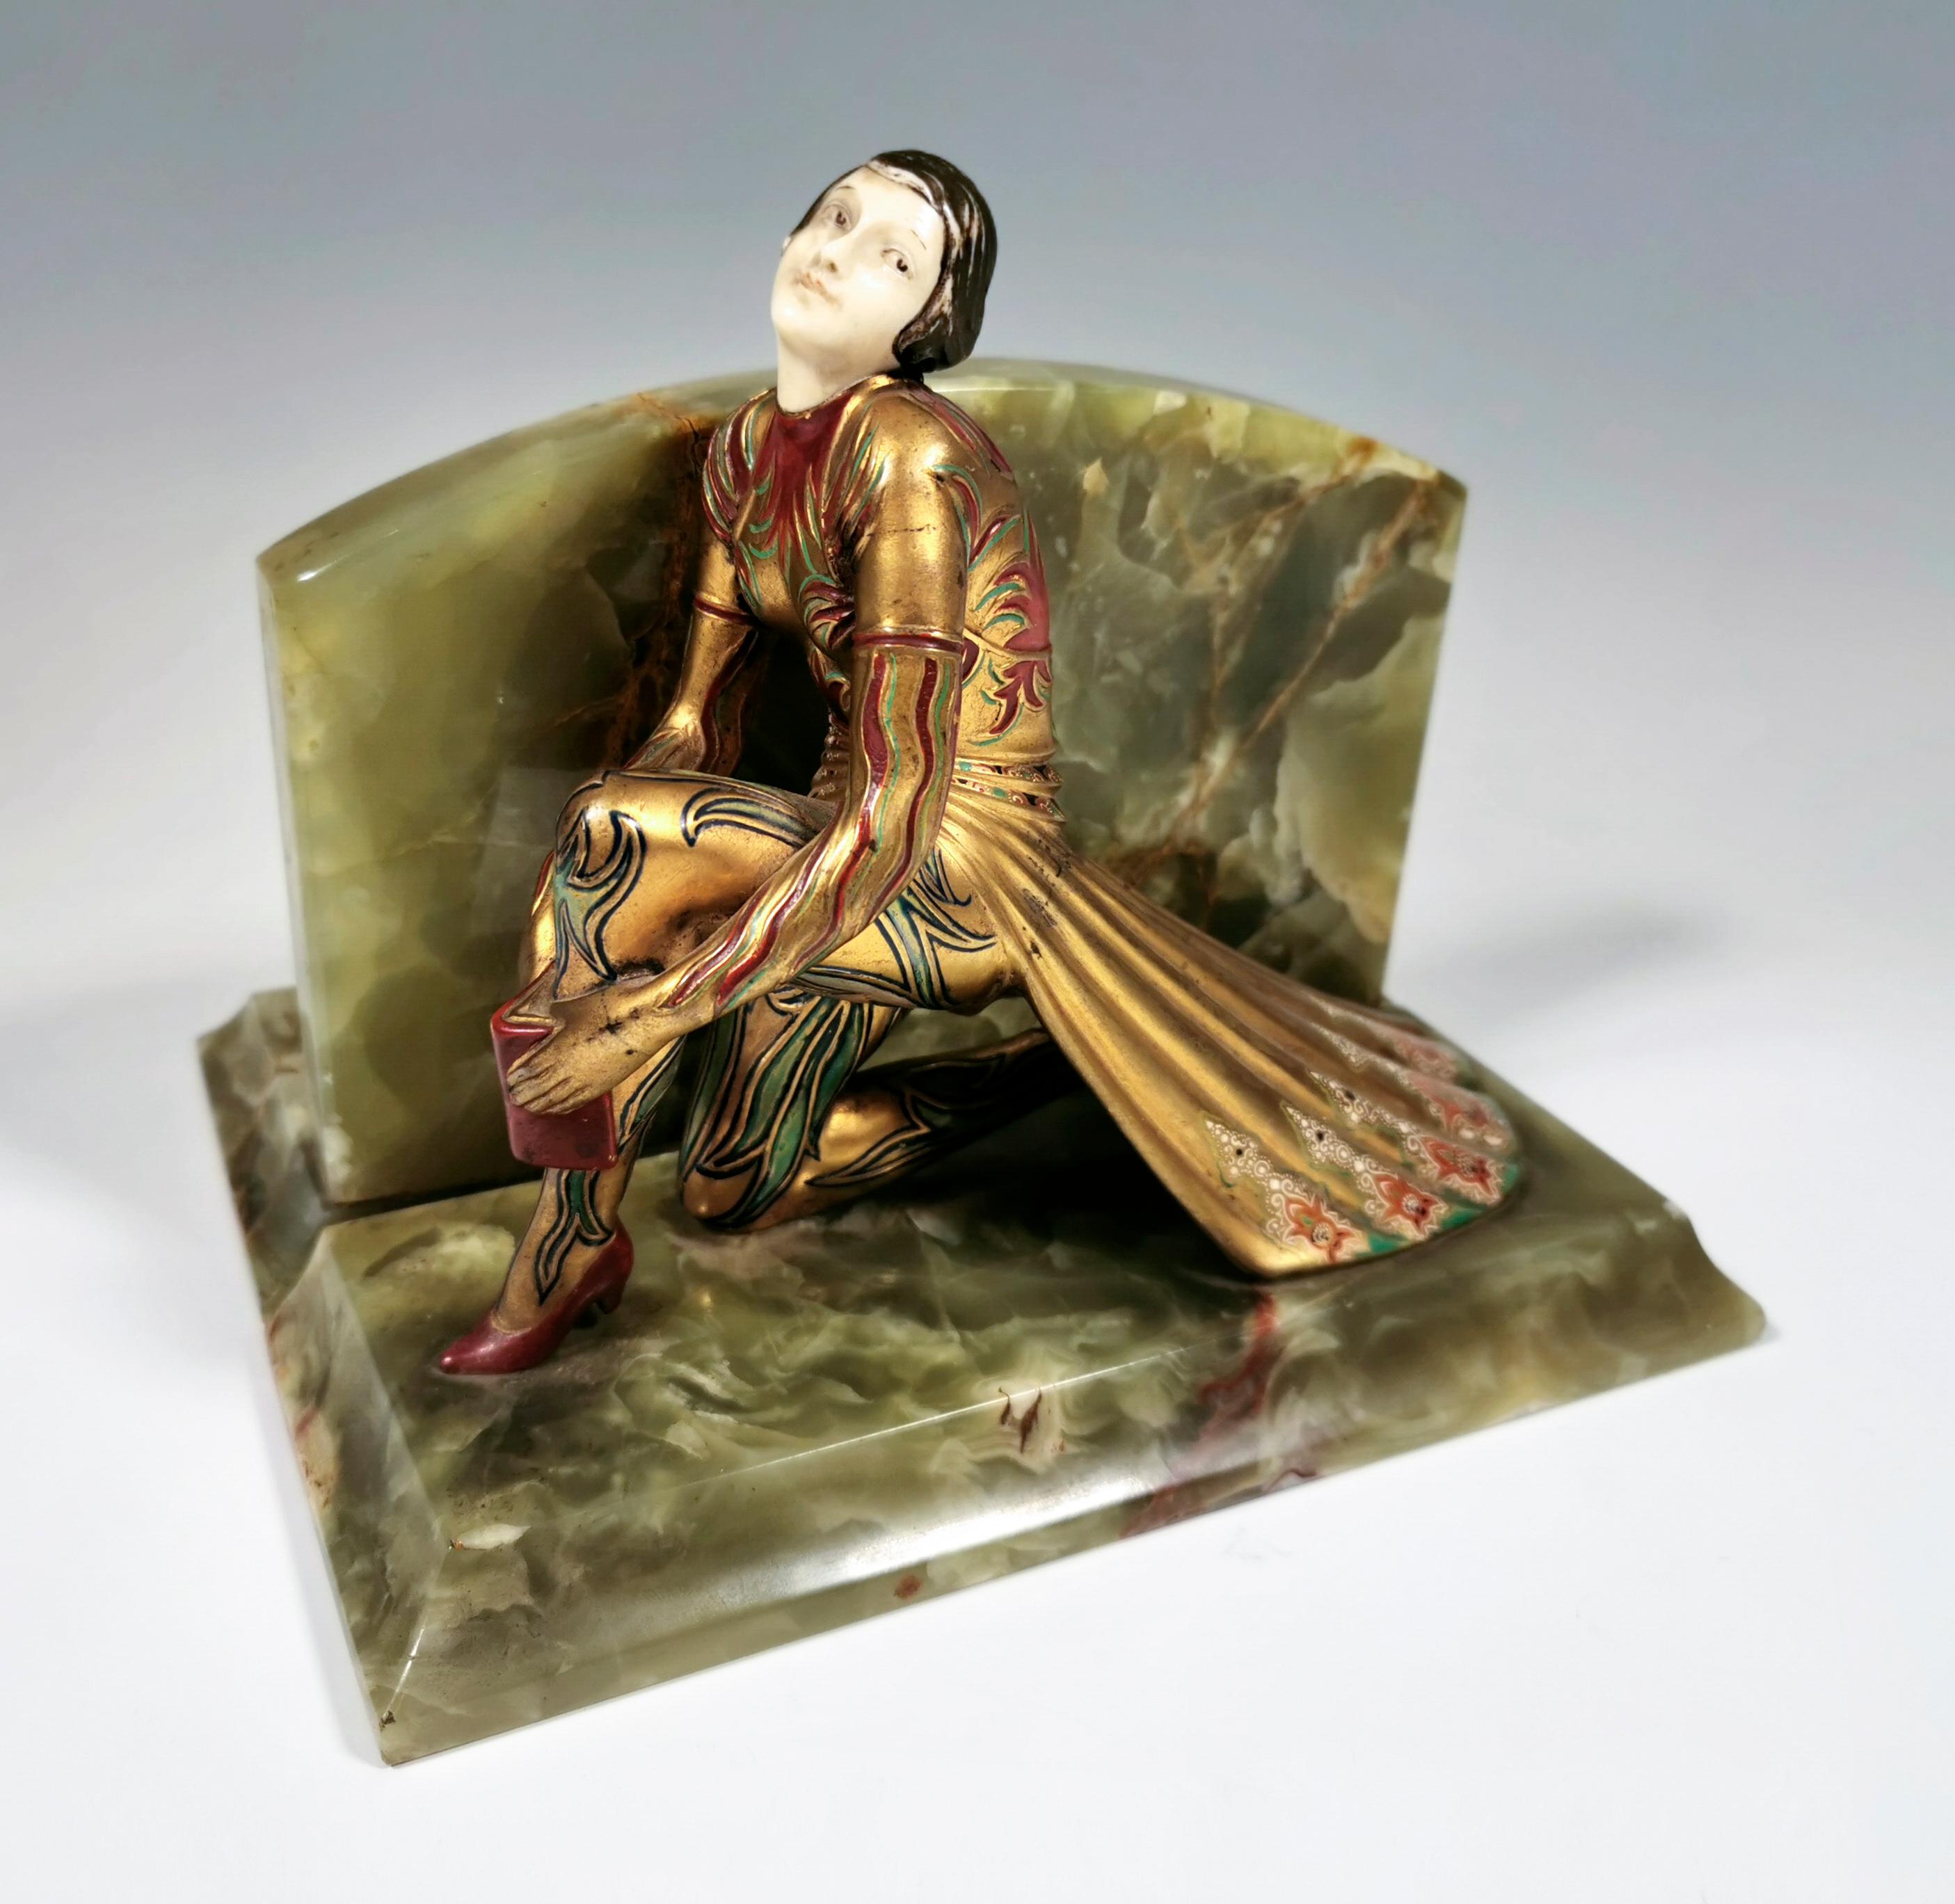 Young Art Deco dancer made of gilded and cold-painted bronze in exotic costume, kneeling on one knee, holding a book in front of the other, upright leg, looking to the side with her head made of decorated ivory. The figure is based on a rectangular